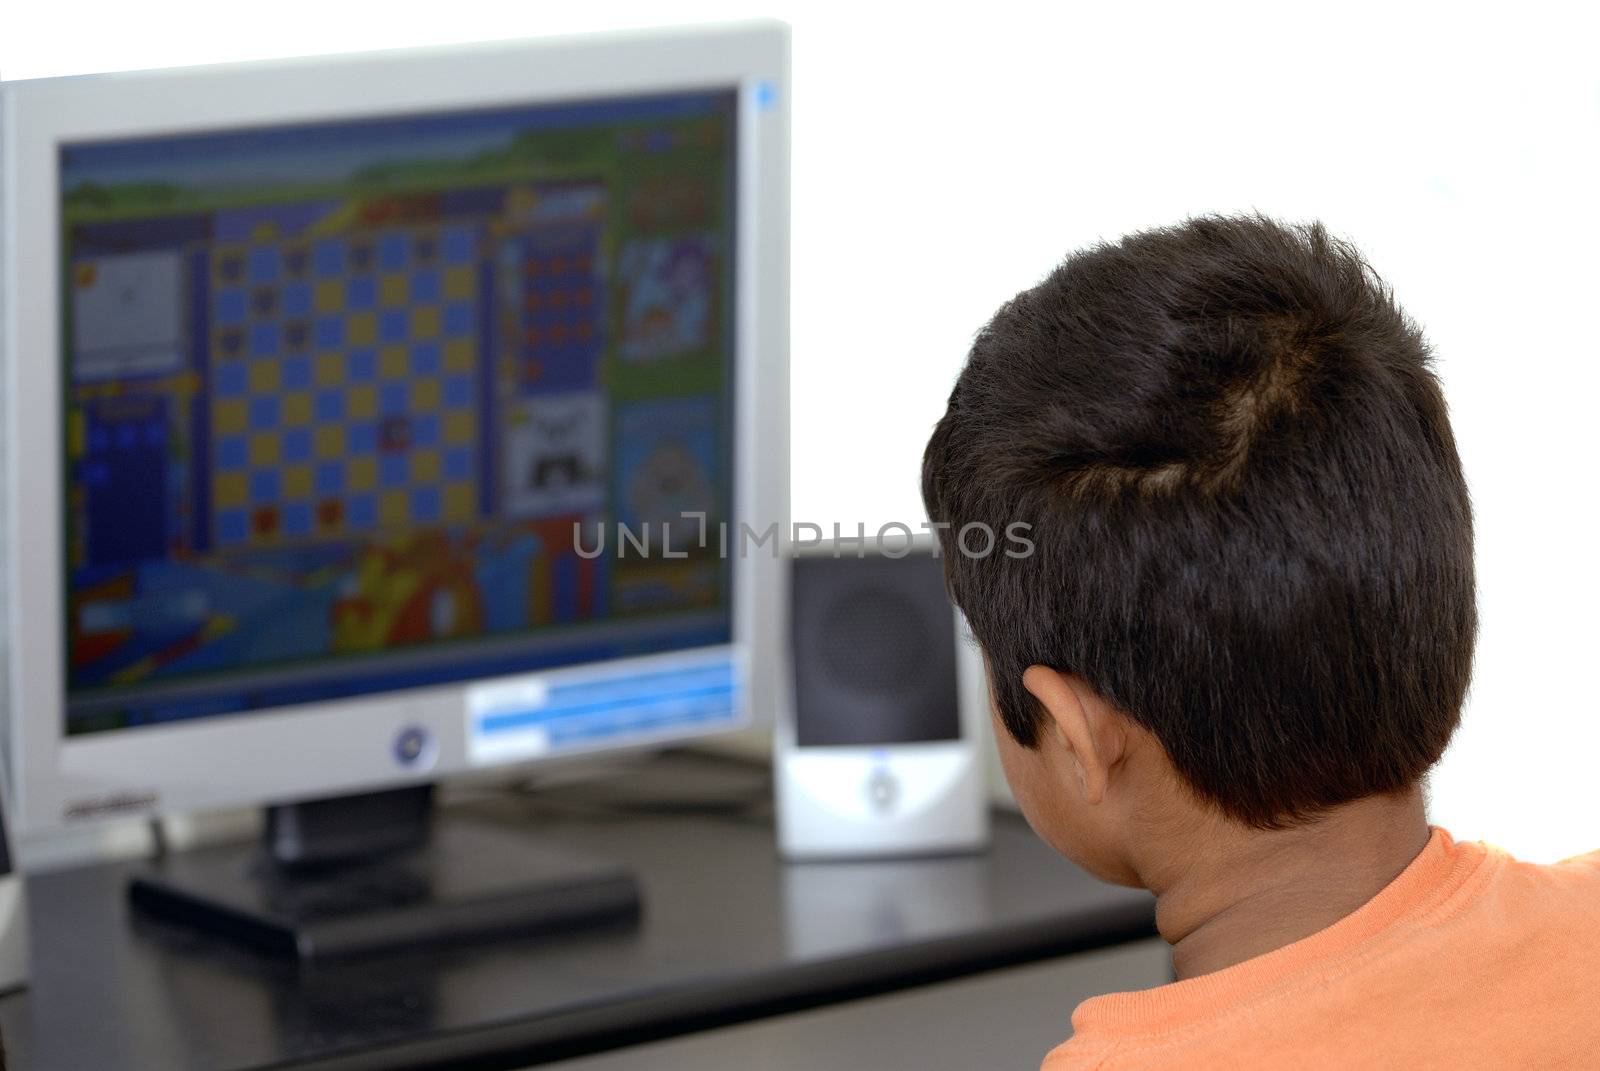 Kid getting addicted to computer games easily